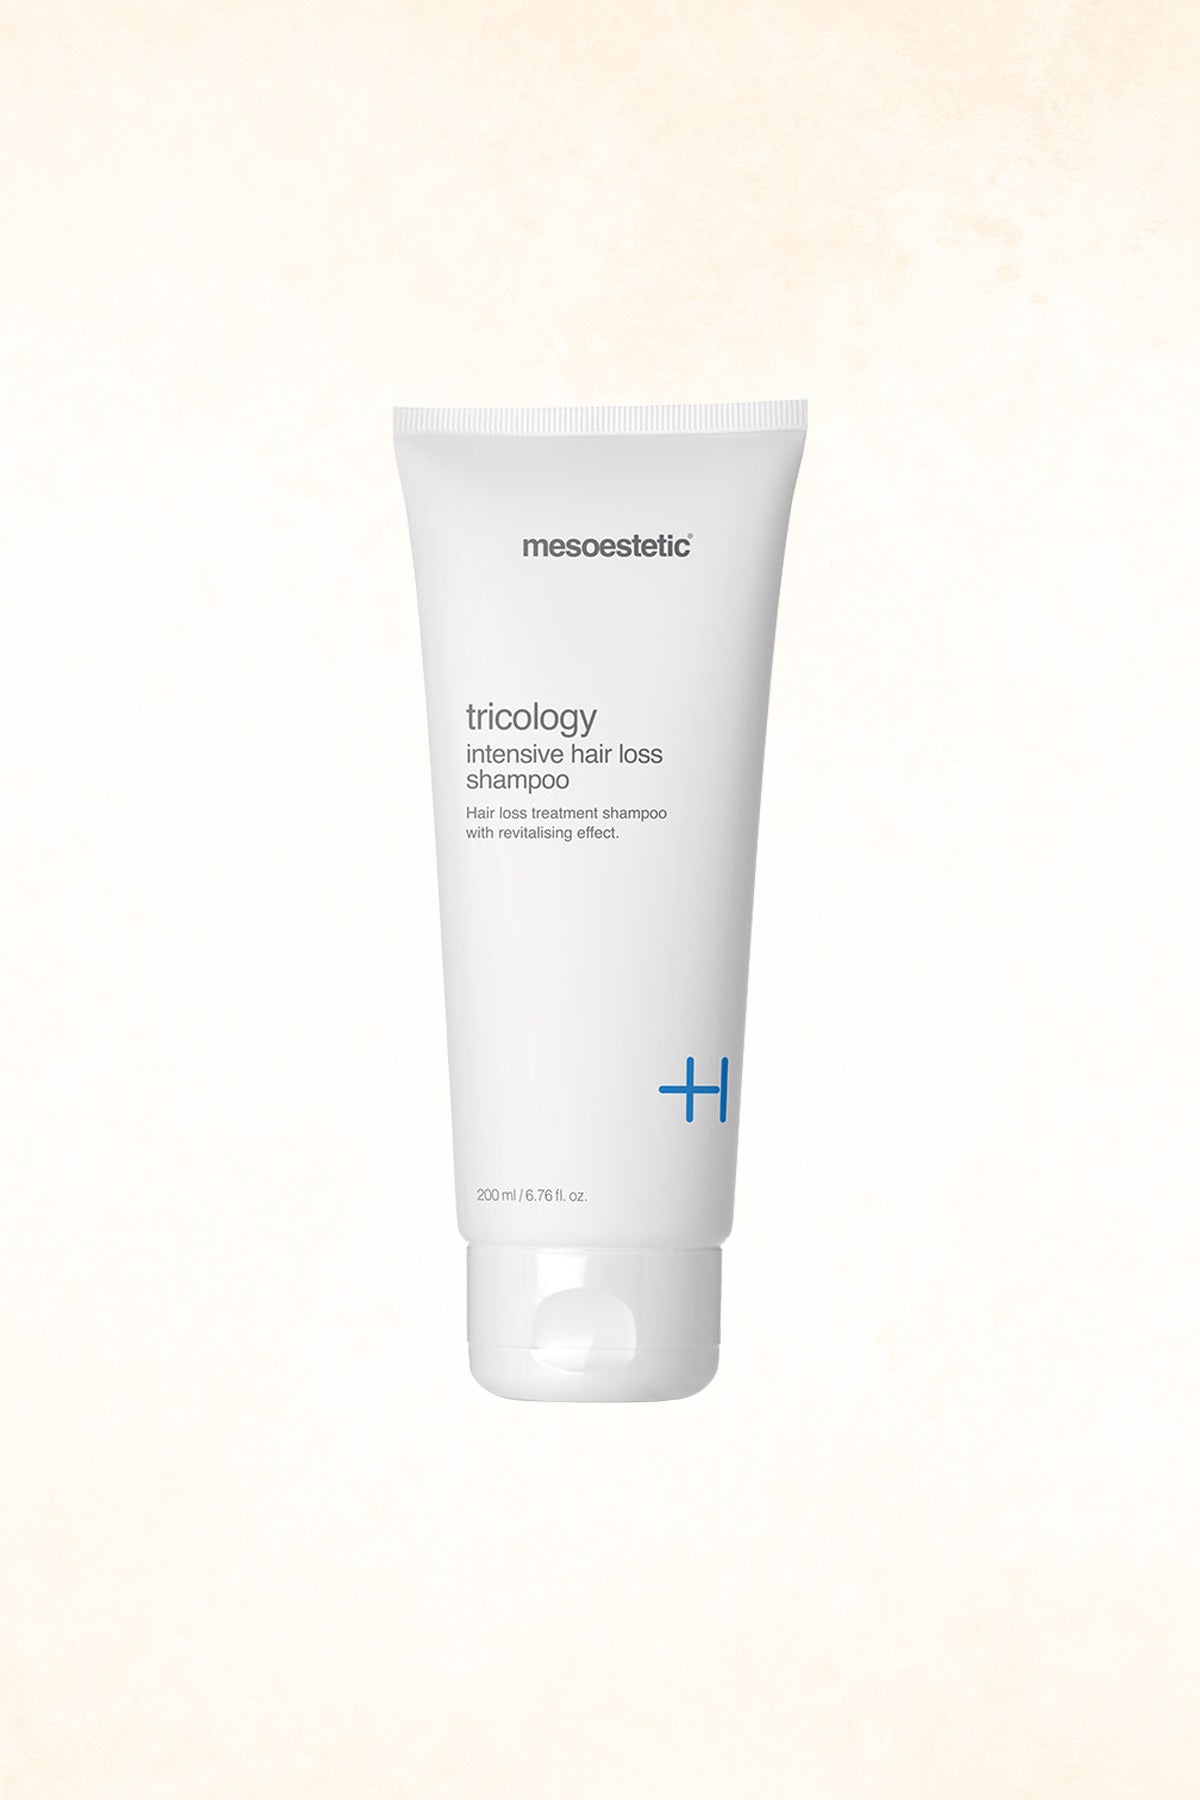 Mesoestetic - Tricology Intensive Hair Loss Shampoo